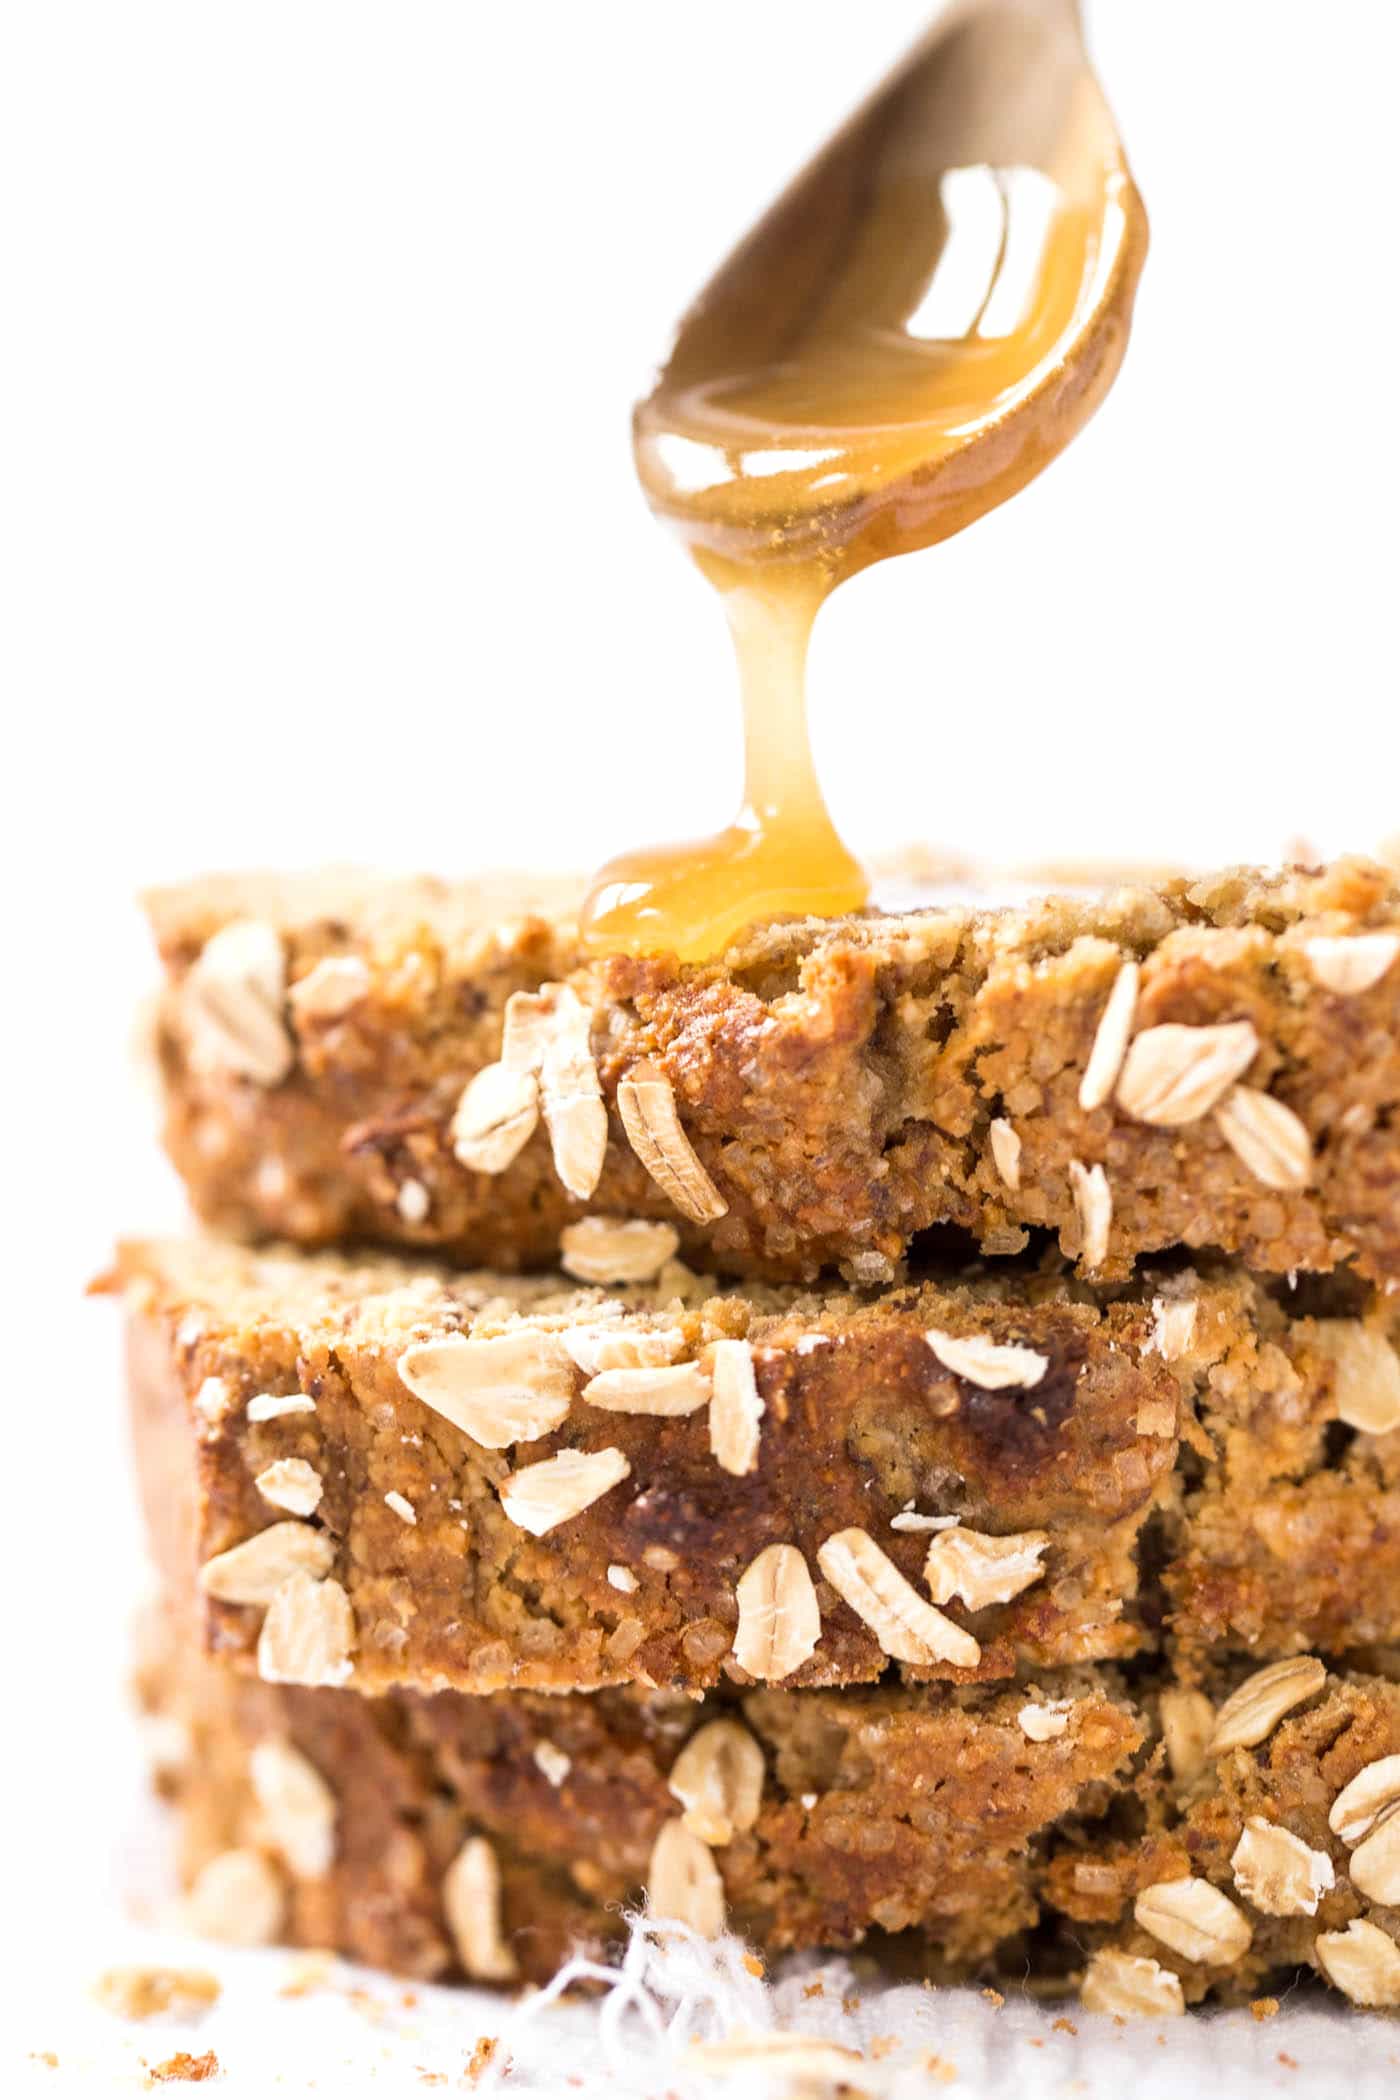 This HEALTHY Honey Oatmeal Banana Bread is packed with nutrient-dense flours, sweetened naturally and uses just one tablespoon of oil!